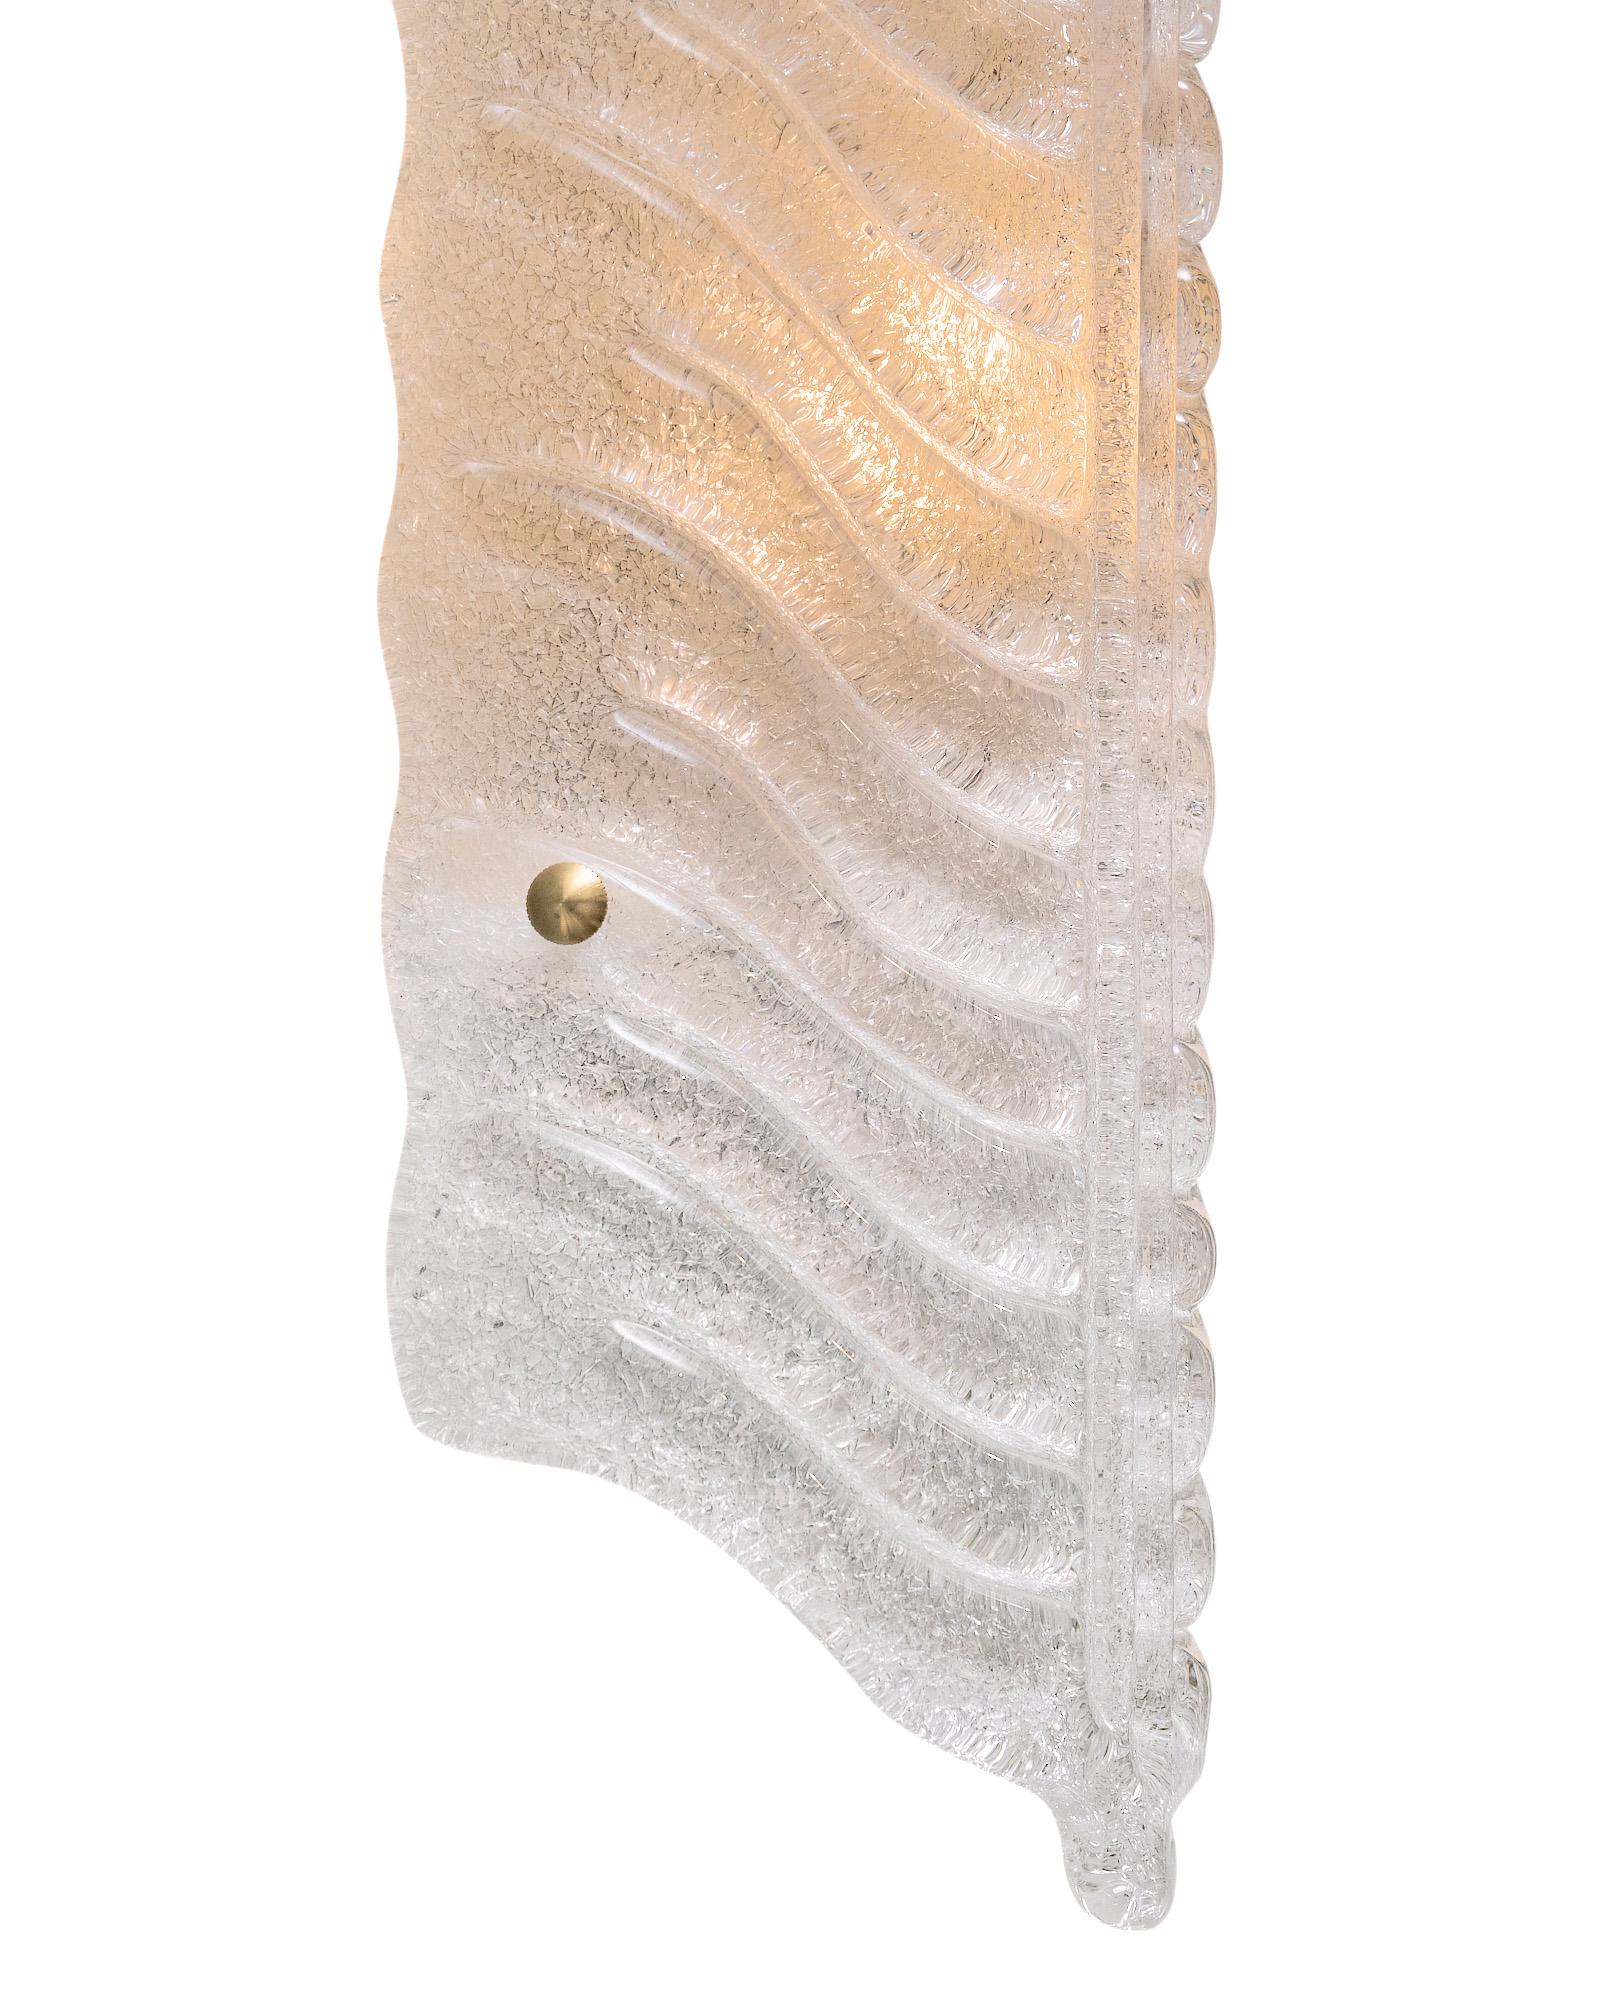 Mid-Century Modern Murano Glass Leaf Sconces For Sale